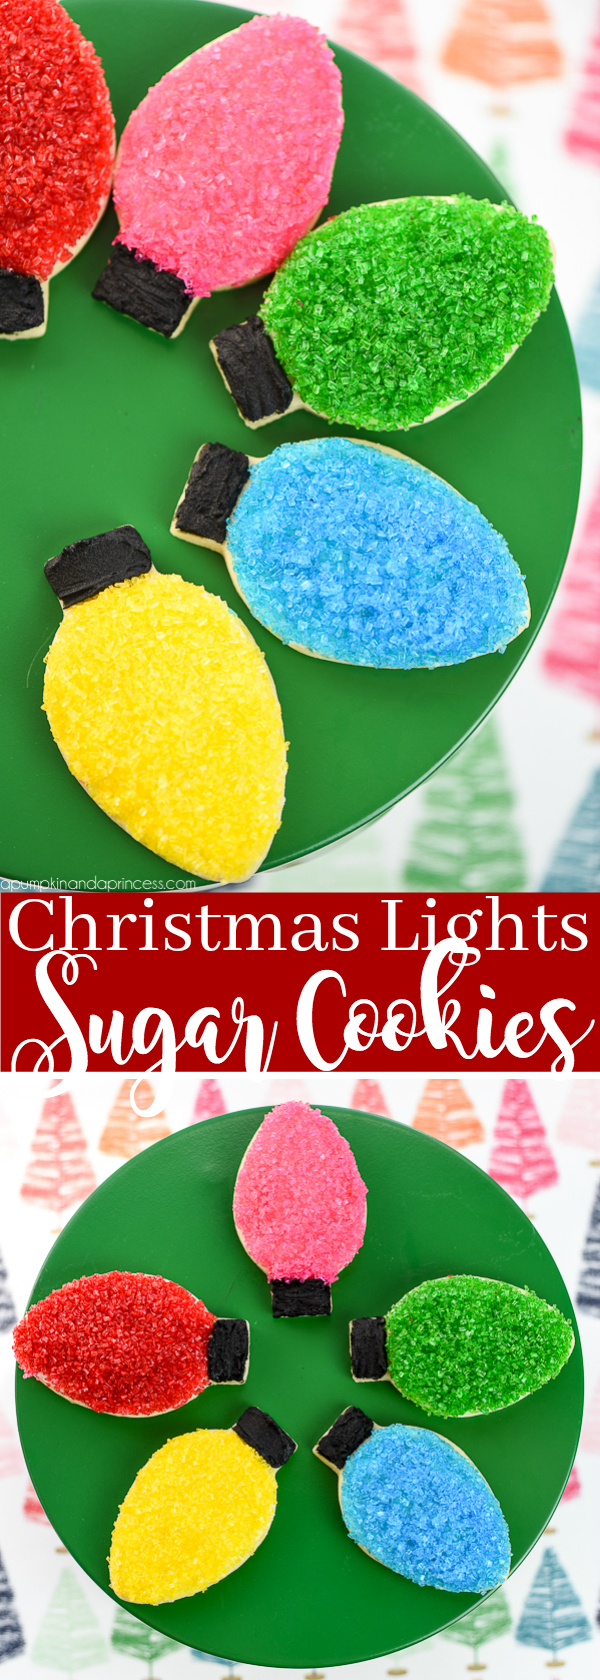 Christmas Light Sugar Cookies – decorate sugar cookies with a classic Christmas light bulb cookie cutter and colorful sprinkles.